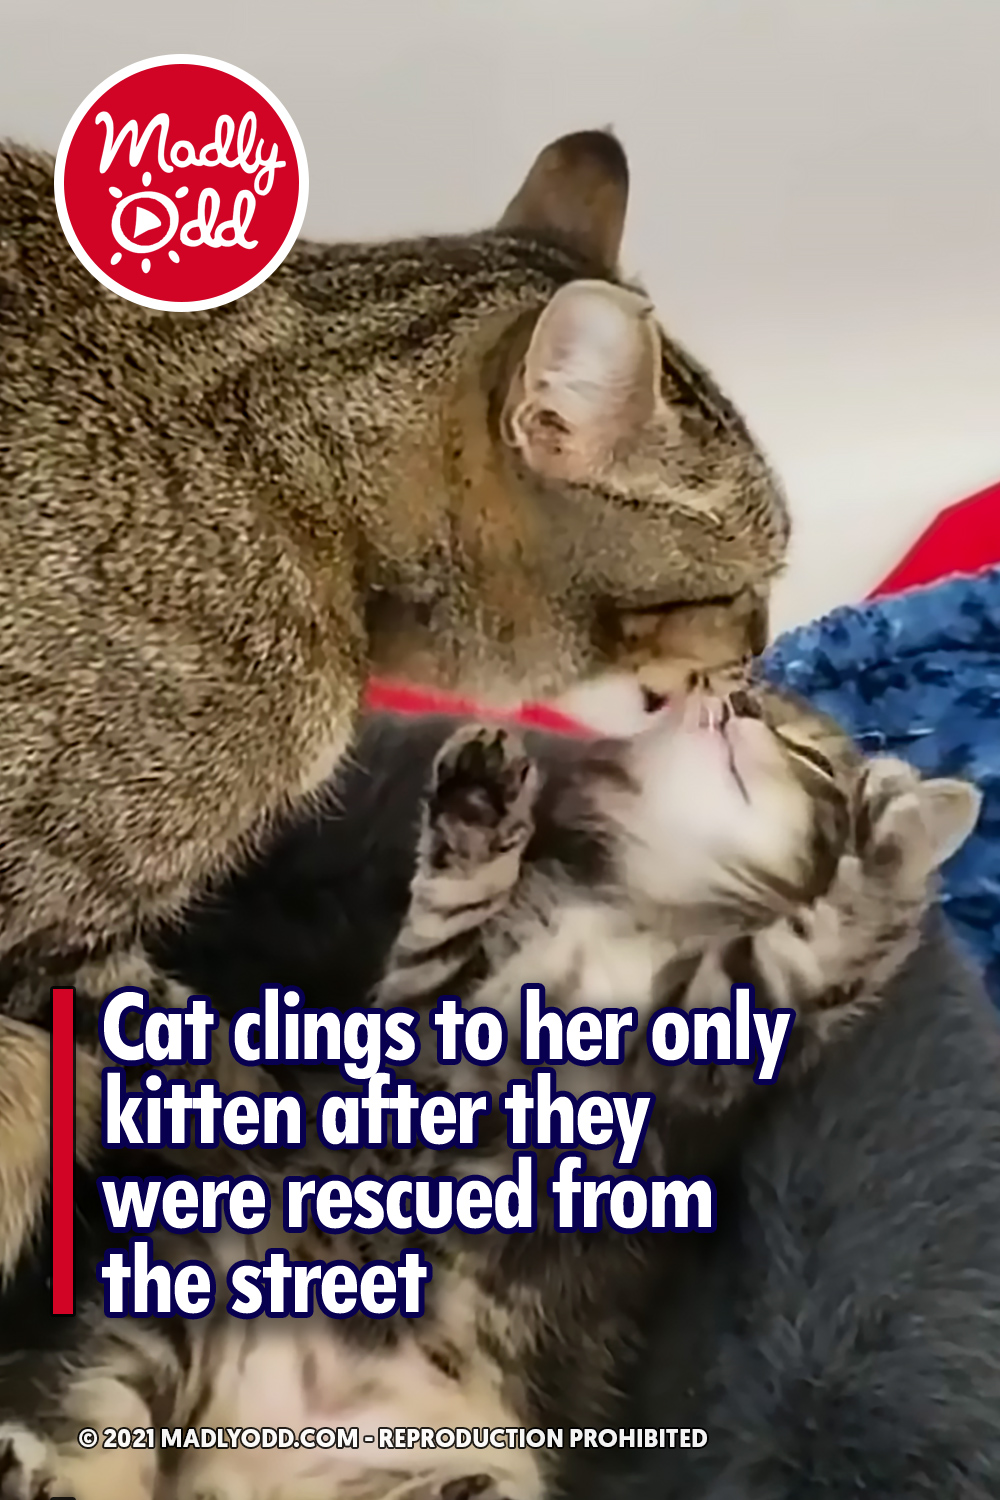 Cat clings to her only kitten after they were rescued from the street